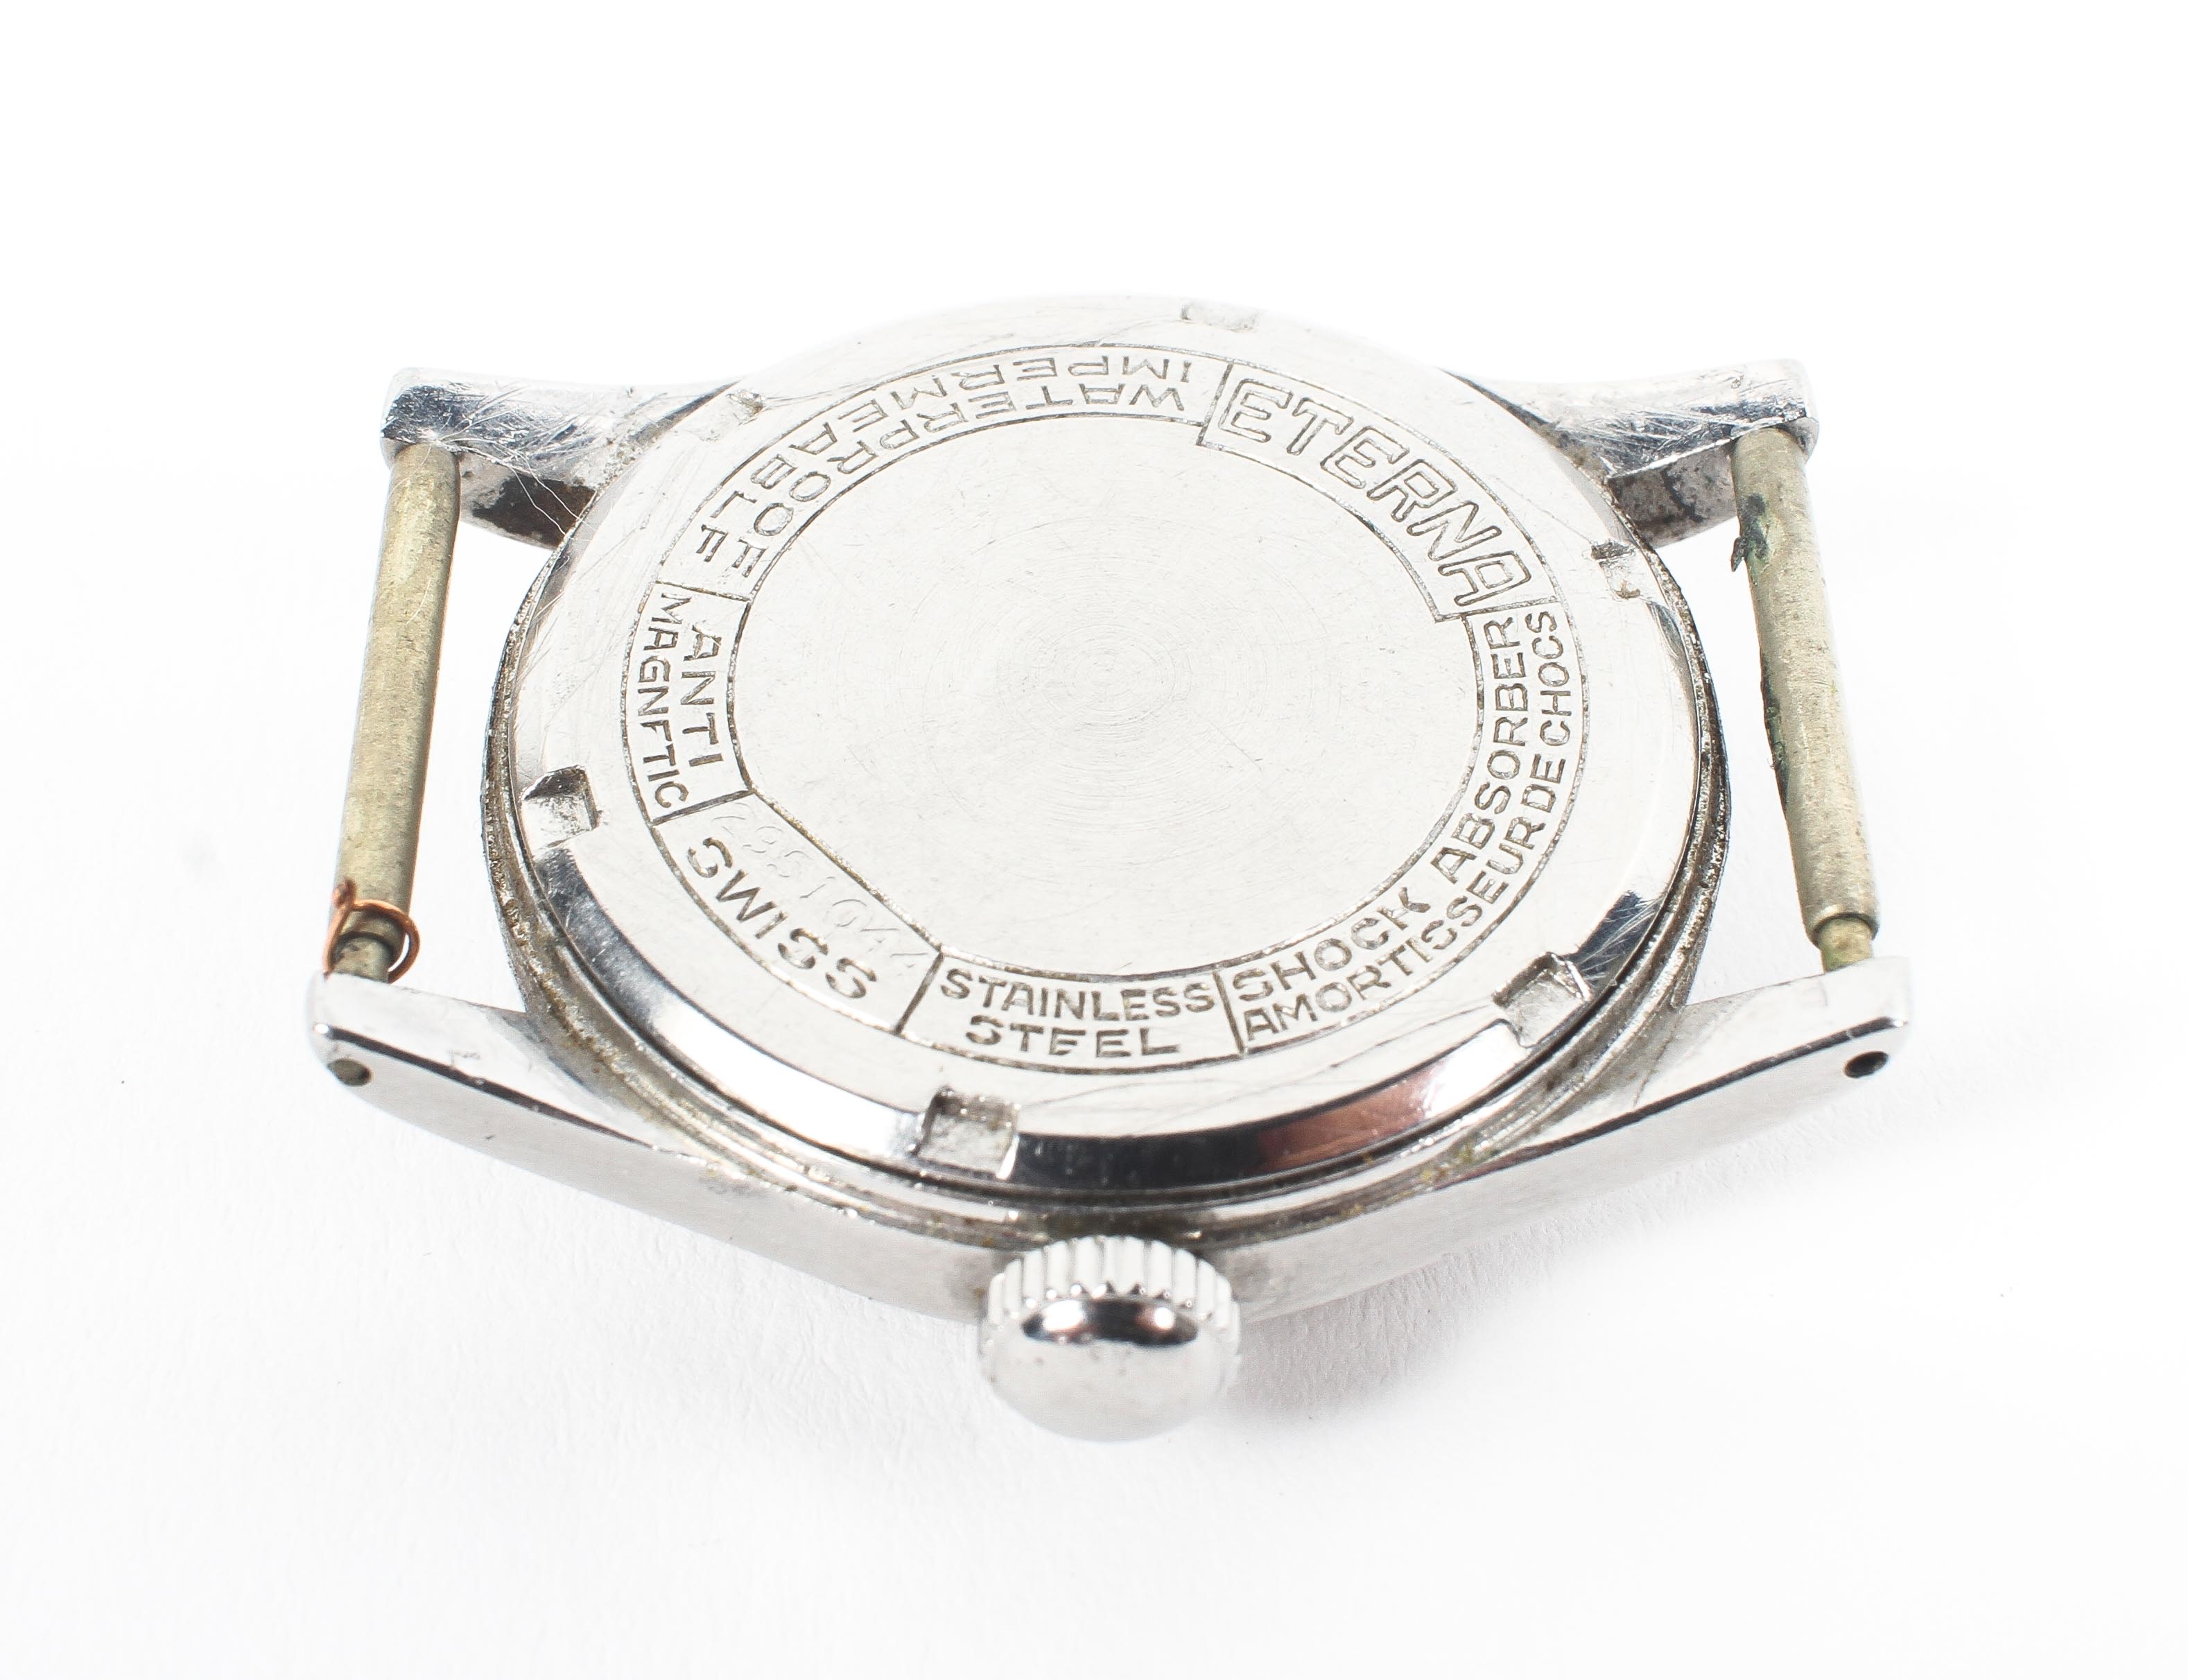 An Eterna ATP style wristwatch (no strap) 28.0mm case with champagne face and numerical markings. - Image 4 of 4